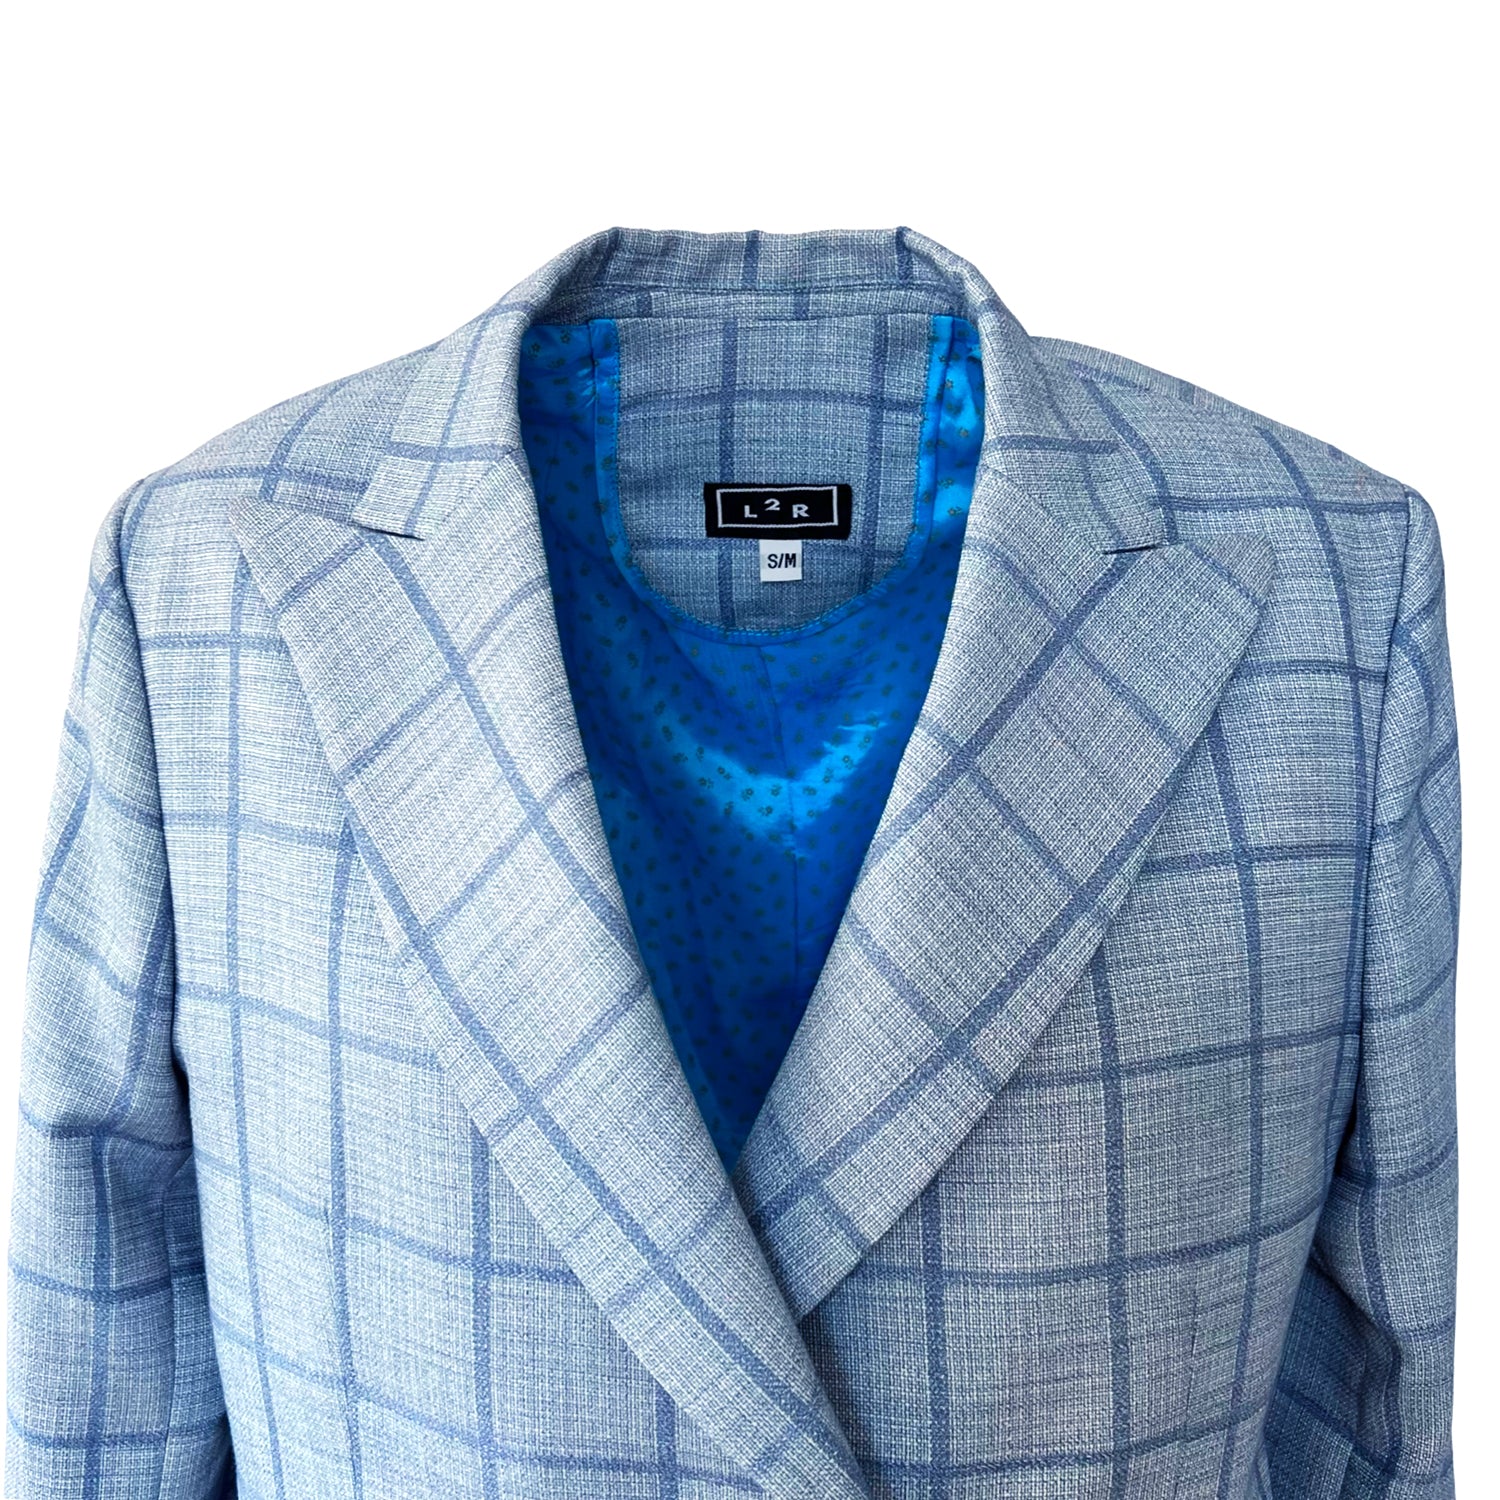 Double-Breasted Blazer in Light Blue Plaid Linen Blend